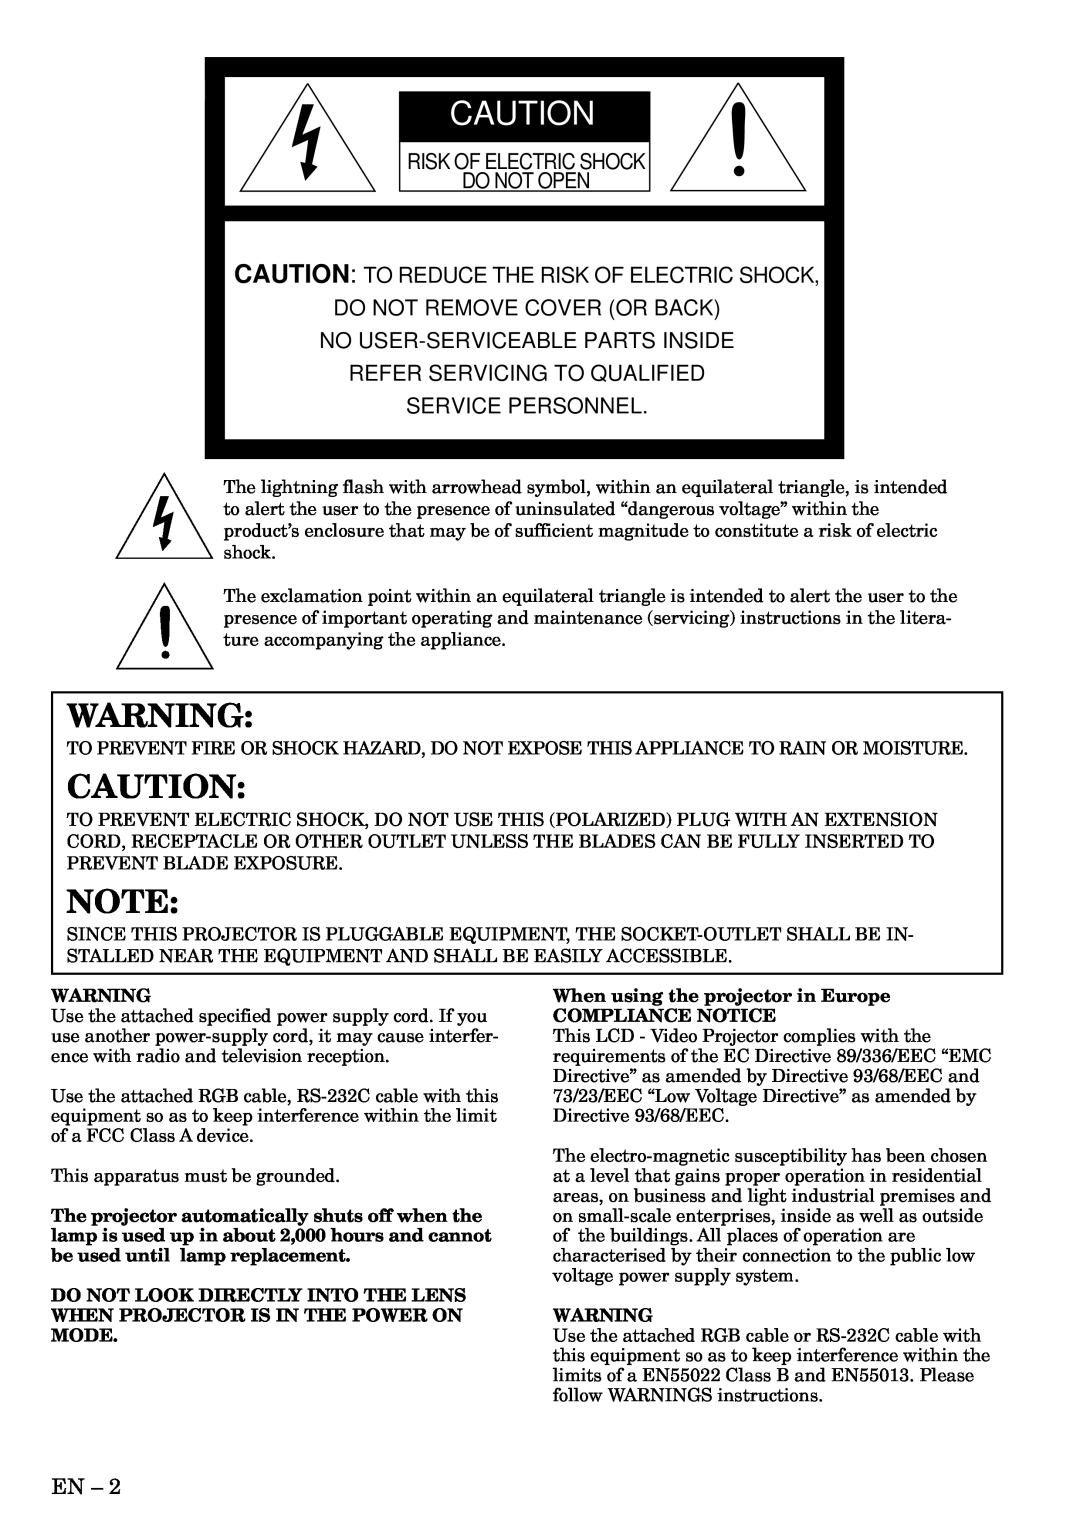 Mitsubishi Electronics S290U user manual Risk Of Electric Shock Do Not Open, Caution To Reduce The Risk Of Electric Shock 